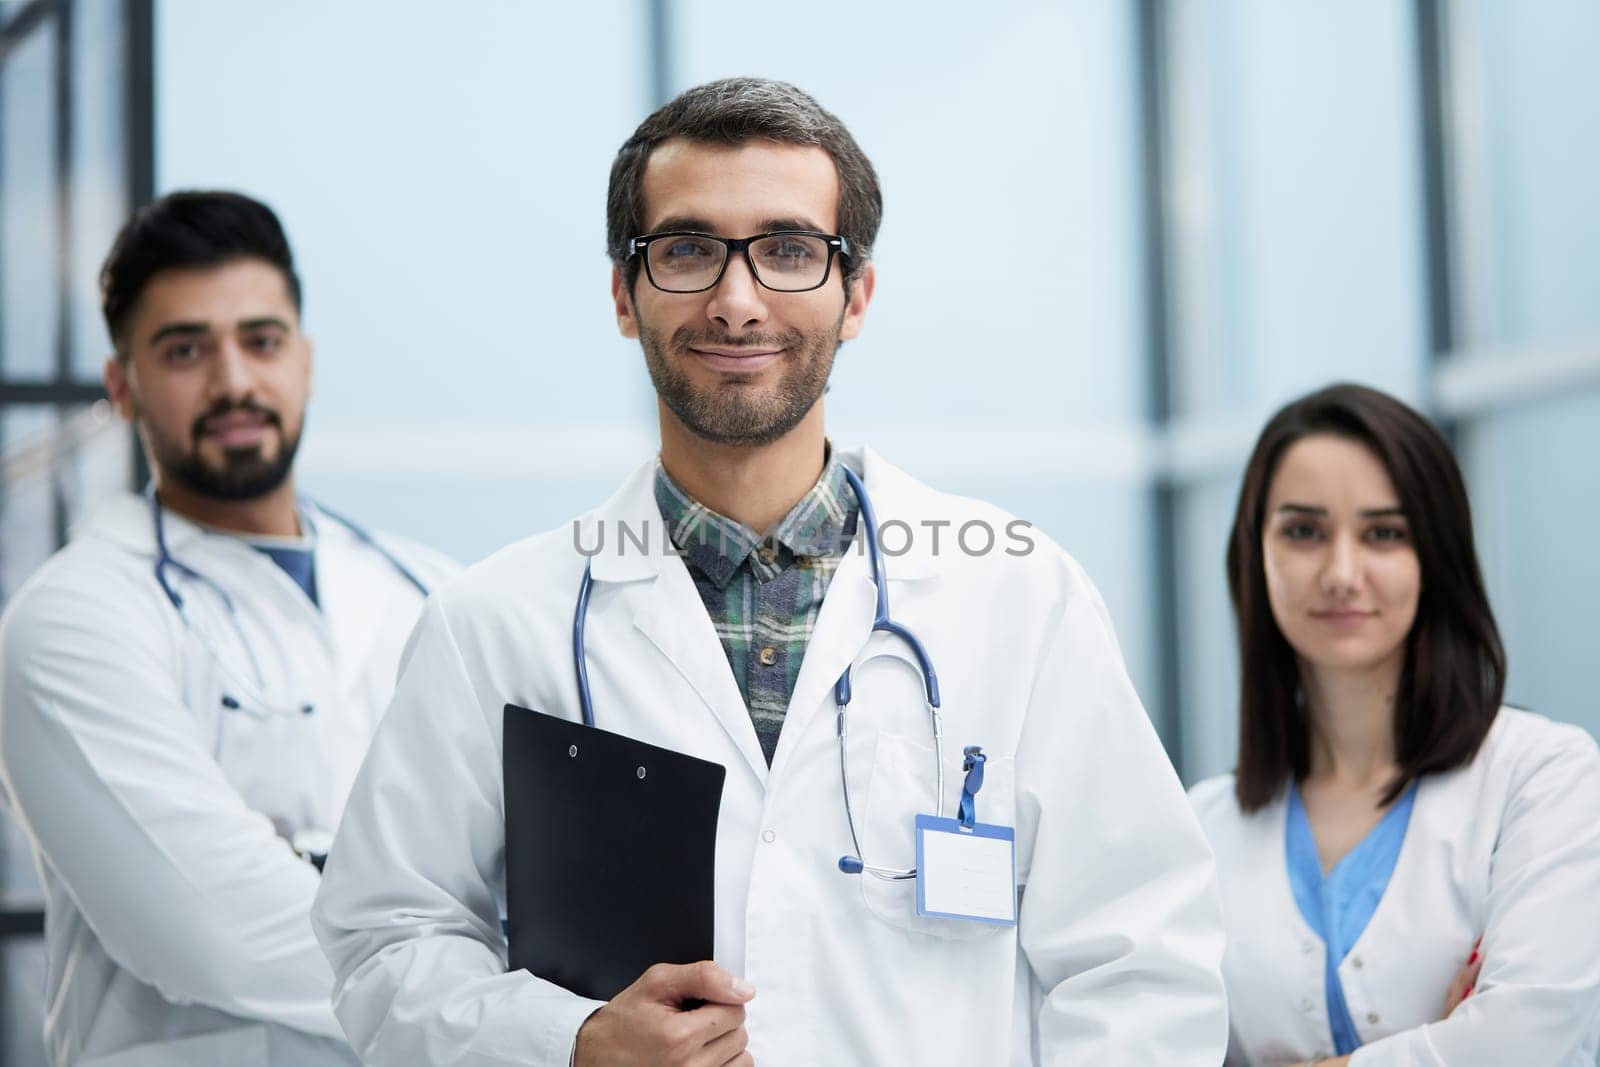 A view of a happy medical team of doctors, man and women by Prosto